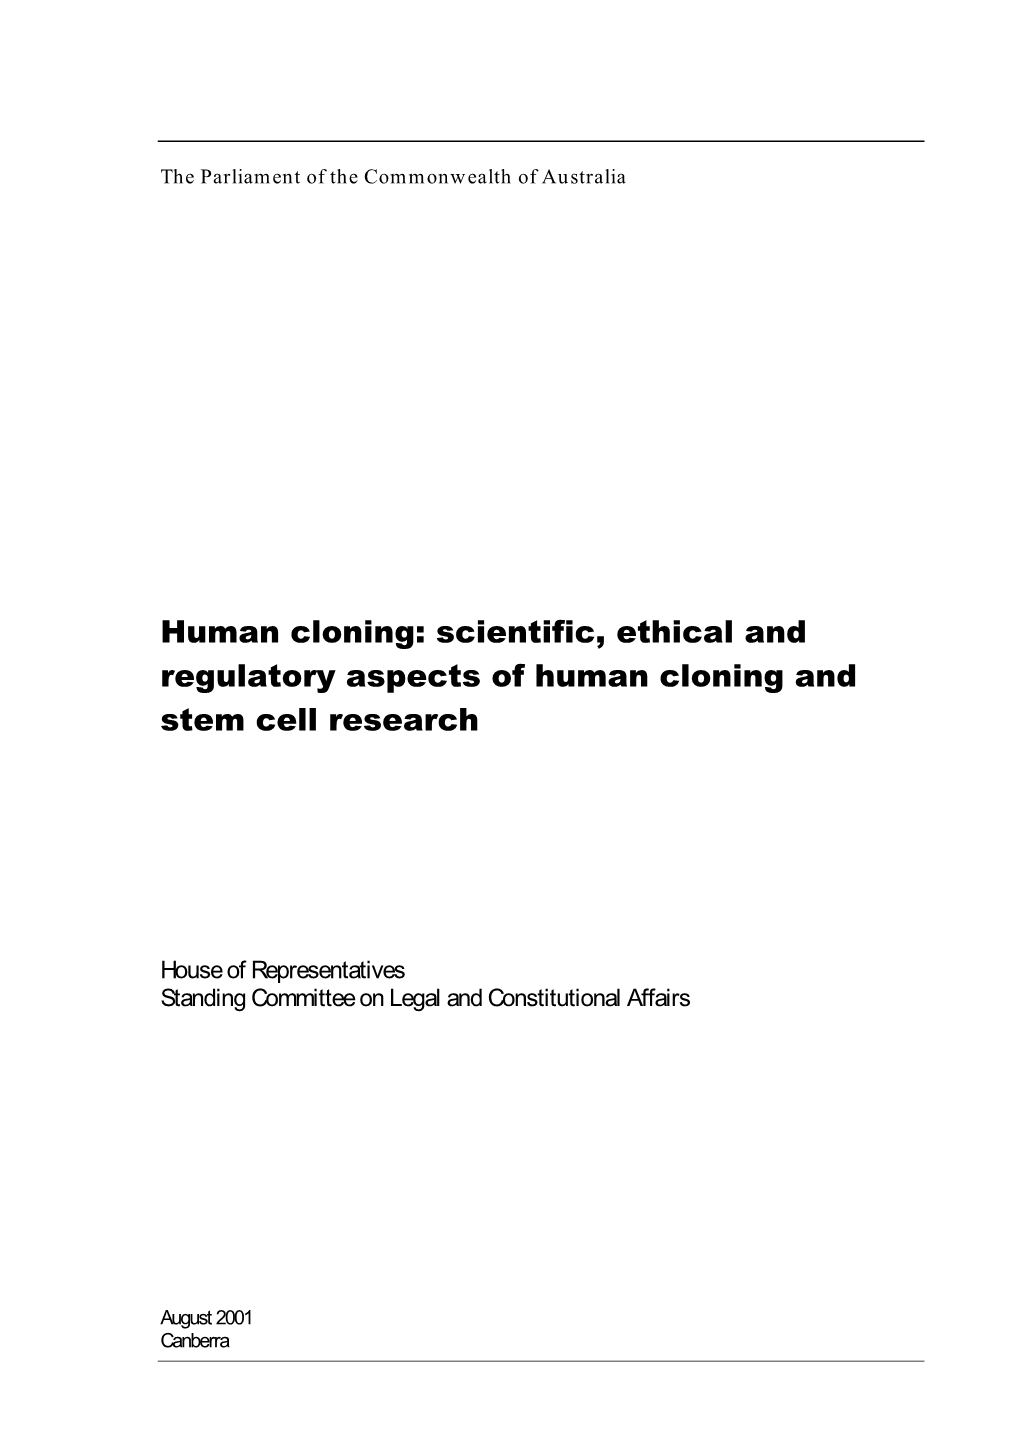 Scientific, Ethical and Regulatory Aspects of Human Cloning and Stem